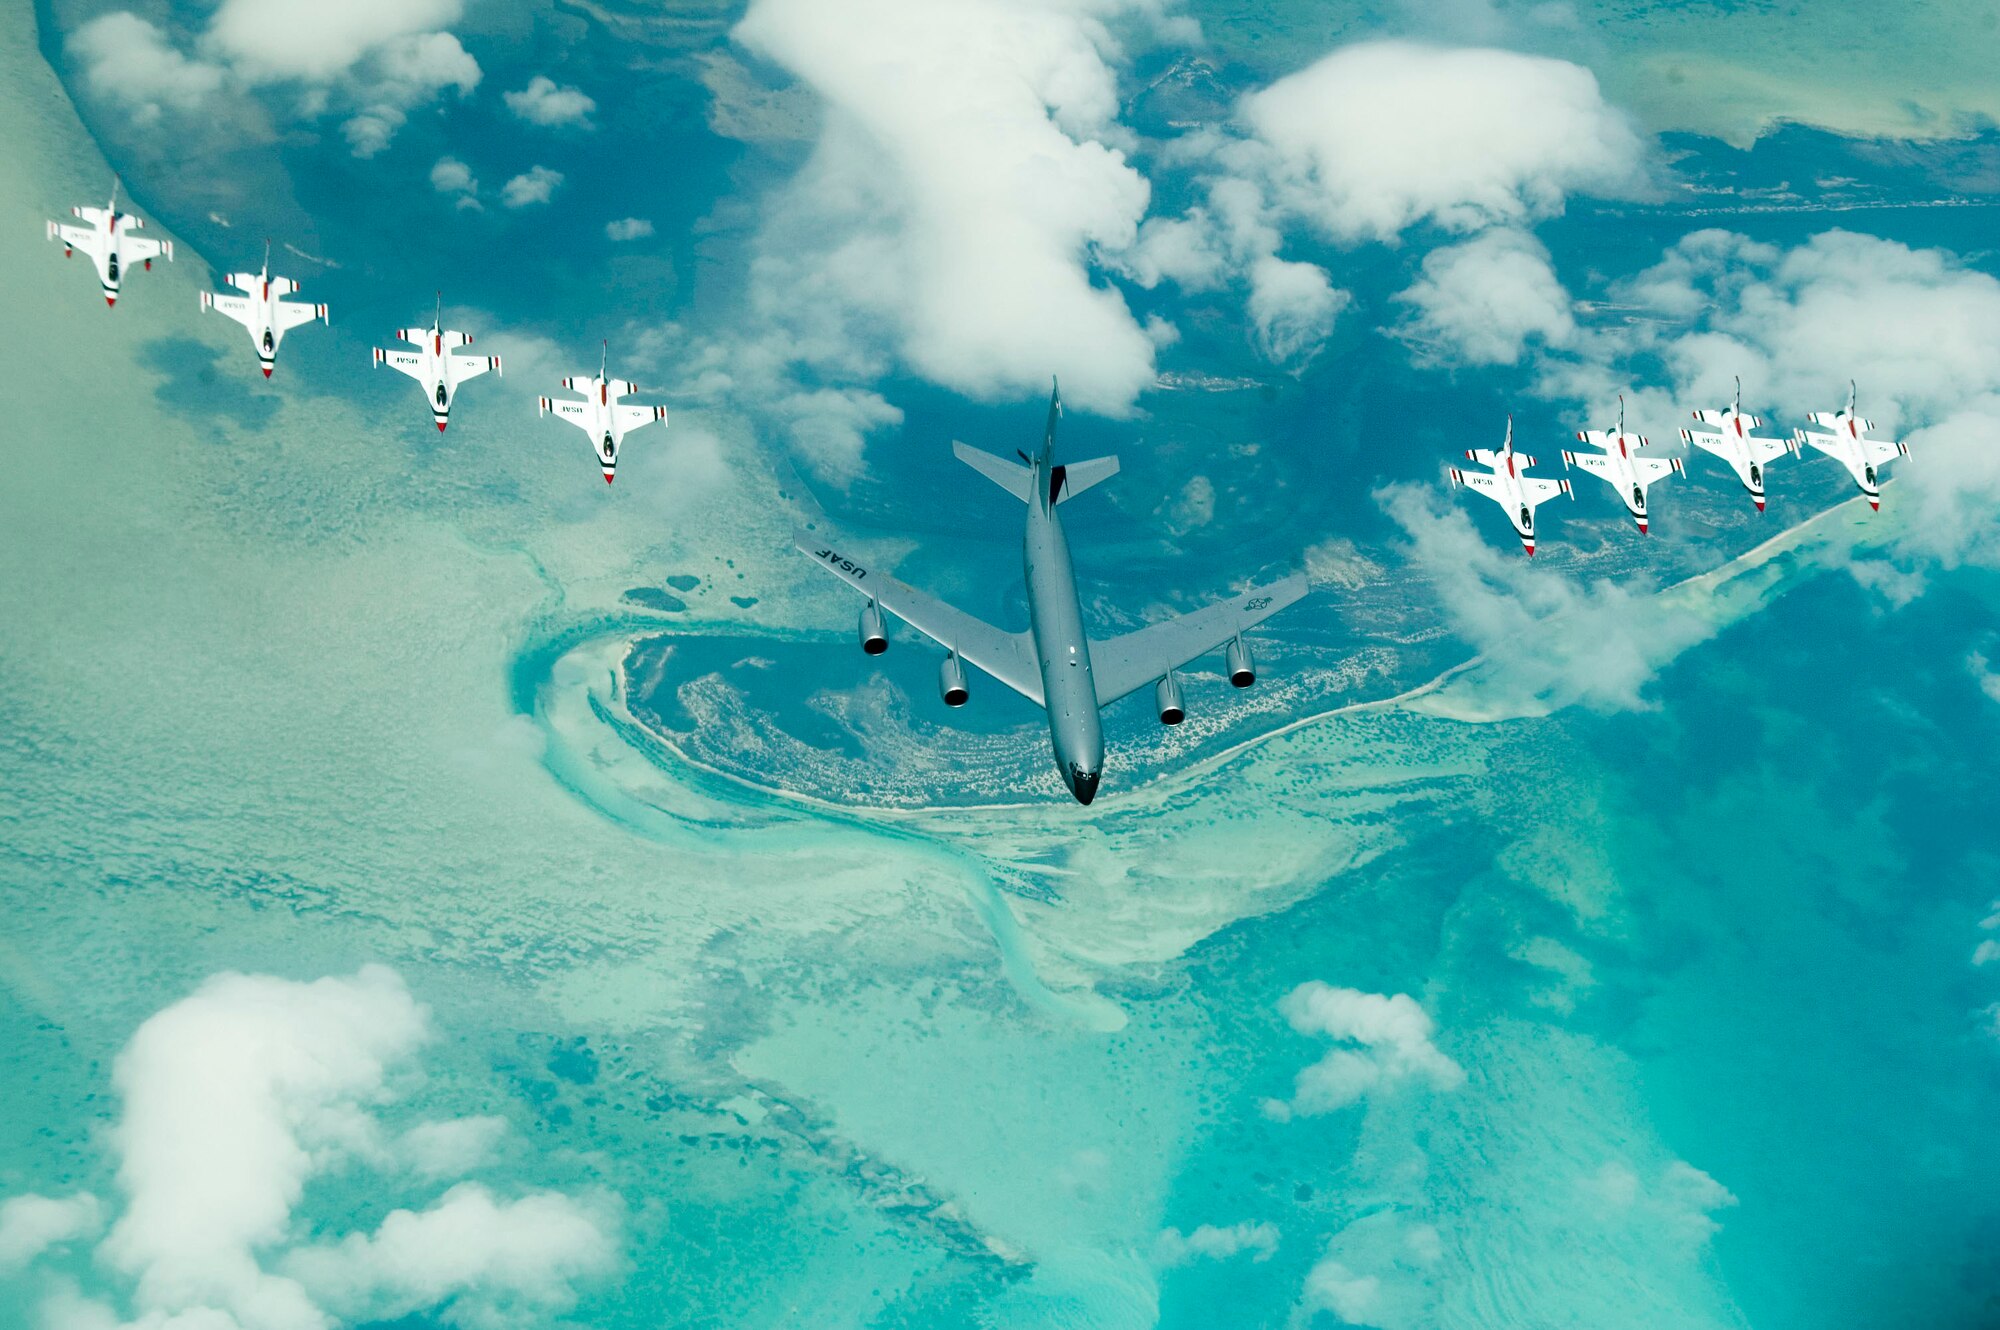 ALTUS AIR FORCE BASE, Okla. – A KC-135 Stratotanker from McConnell Air Force Base, Kansas flies in formation with the Thunderbirds over the Caribbean Sea enroute to an air show held at the new Ceiba Airport, in Ceiba, Puerto Rico April 18 and 19.  Altus and McConnell tankers supported the Thunderbirds by refueling the jets and enabling them to perform at the former U.S. Navy's Roosevelt Roads Naval Base for the first time in 30 years. (U.S. Air Force photo/Airman 1st Class Leandra D. Hernandez)